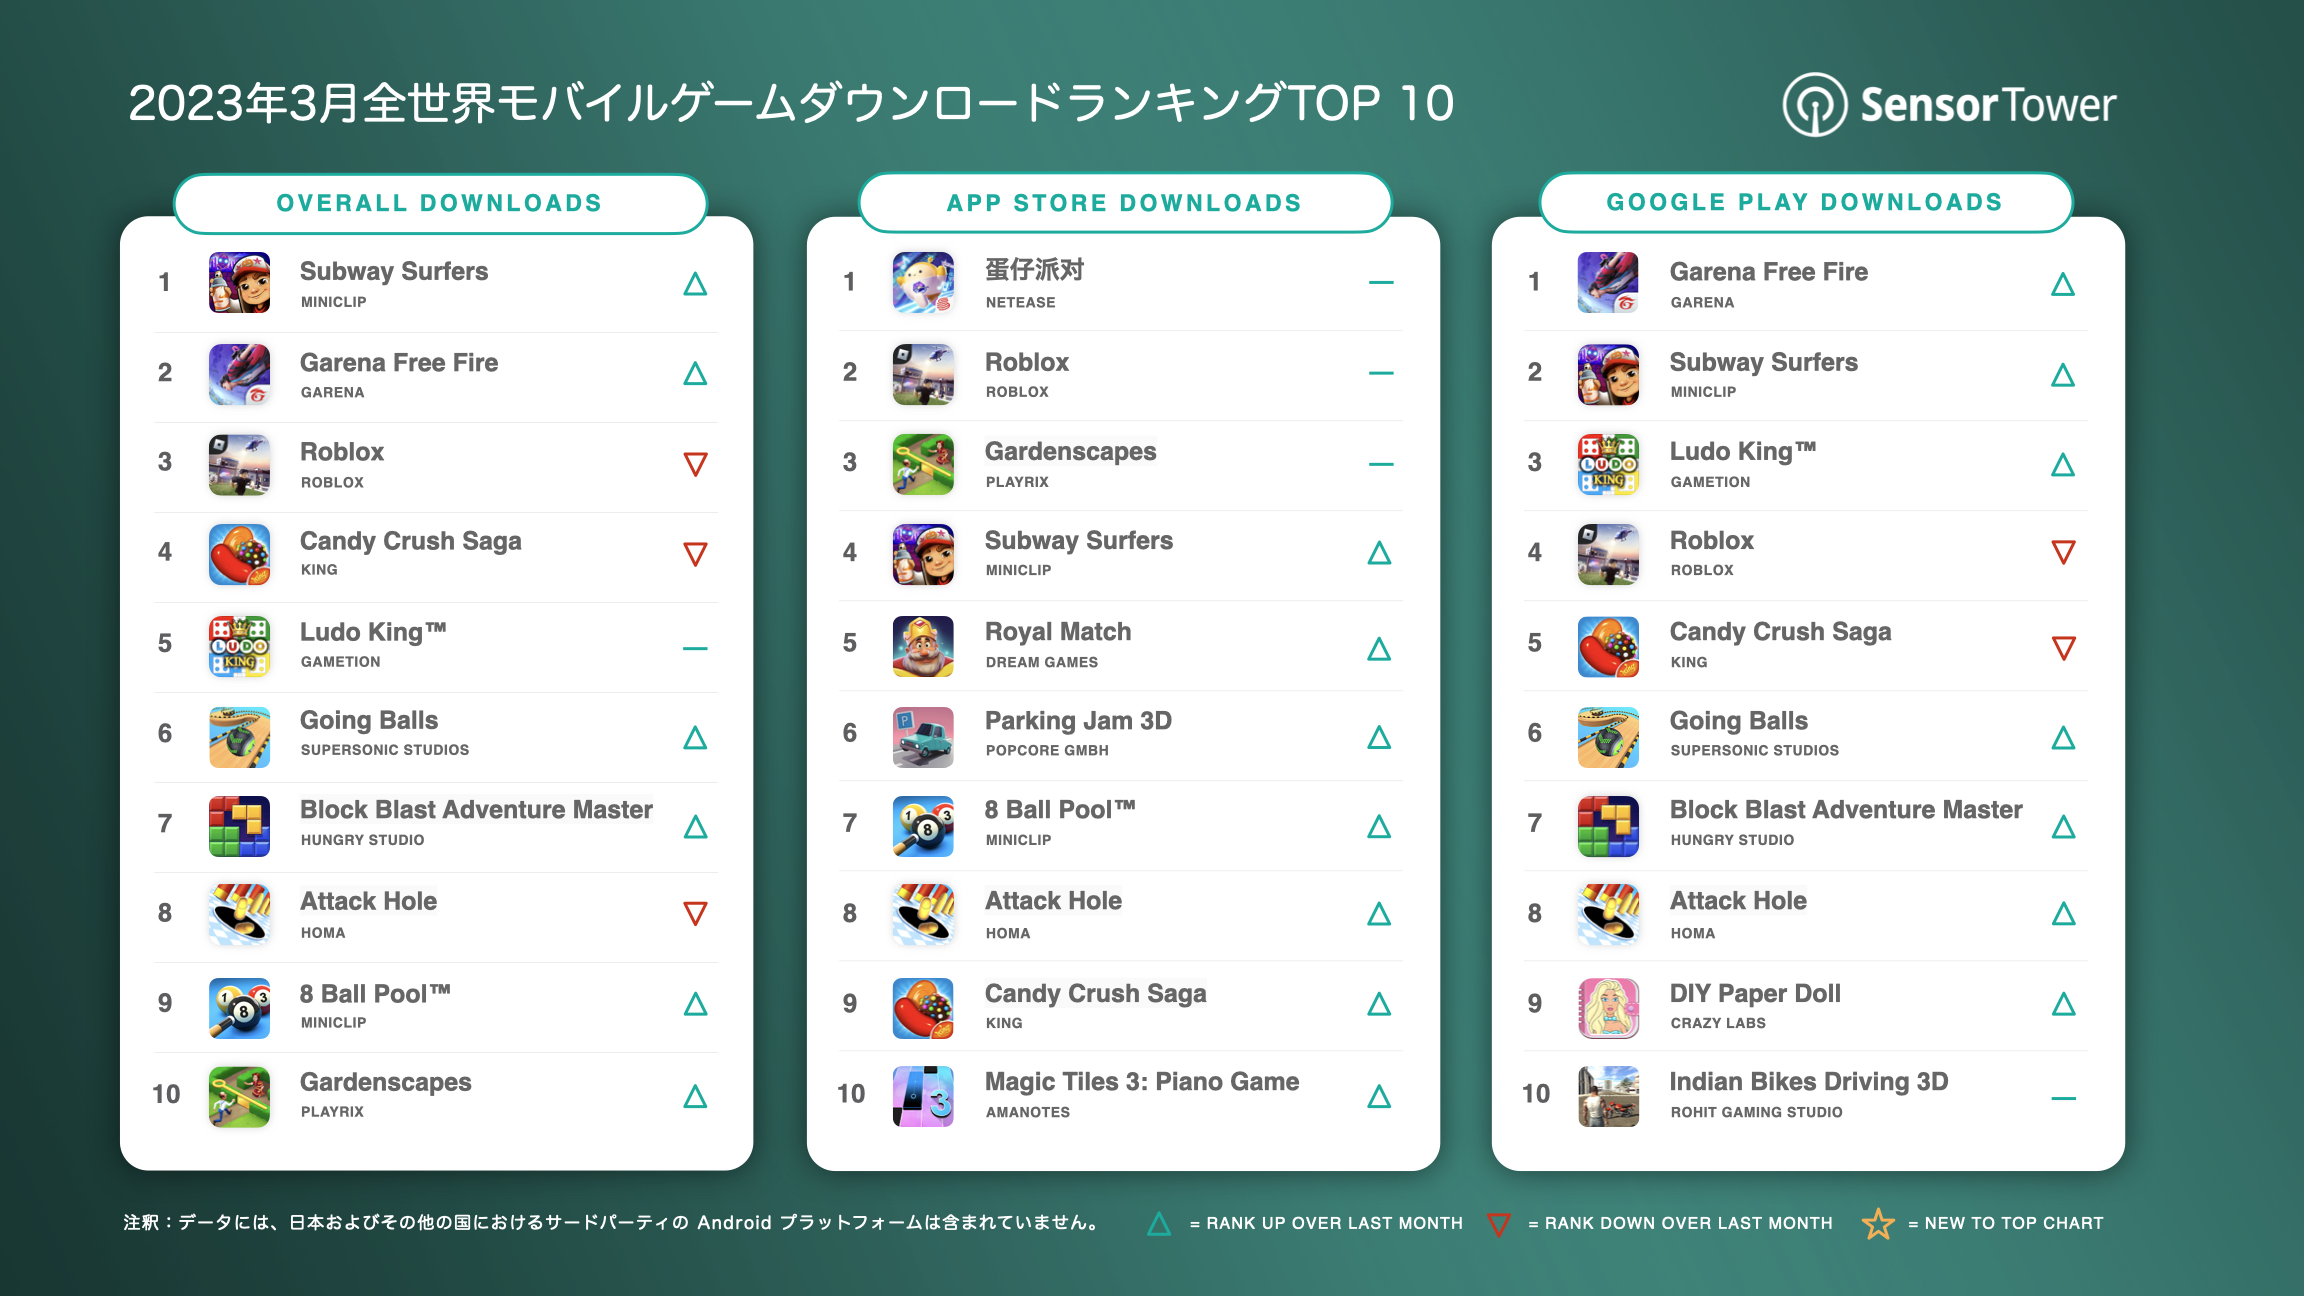 -JP- Top Mobile Games Worldwide for March 2023 by Downloads